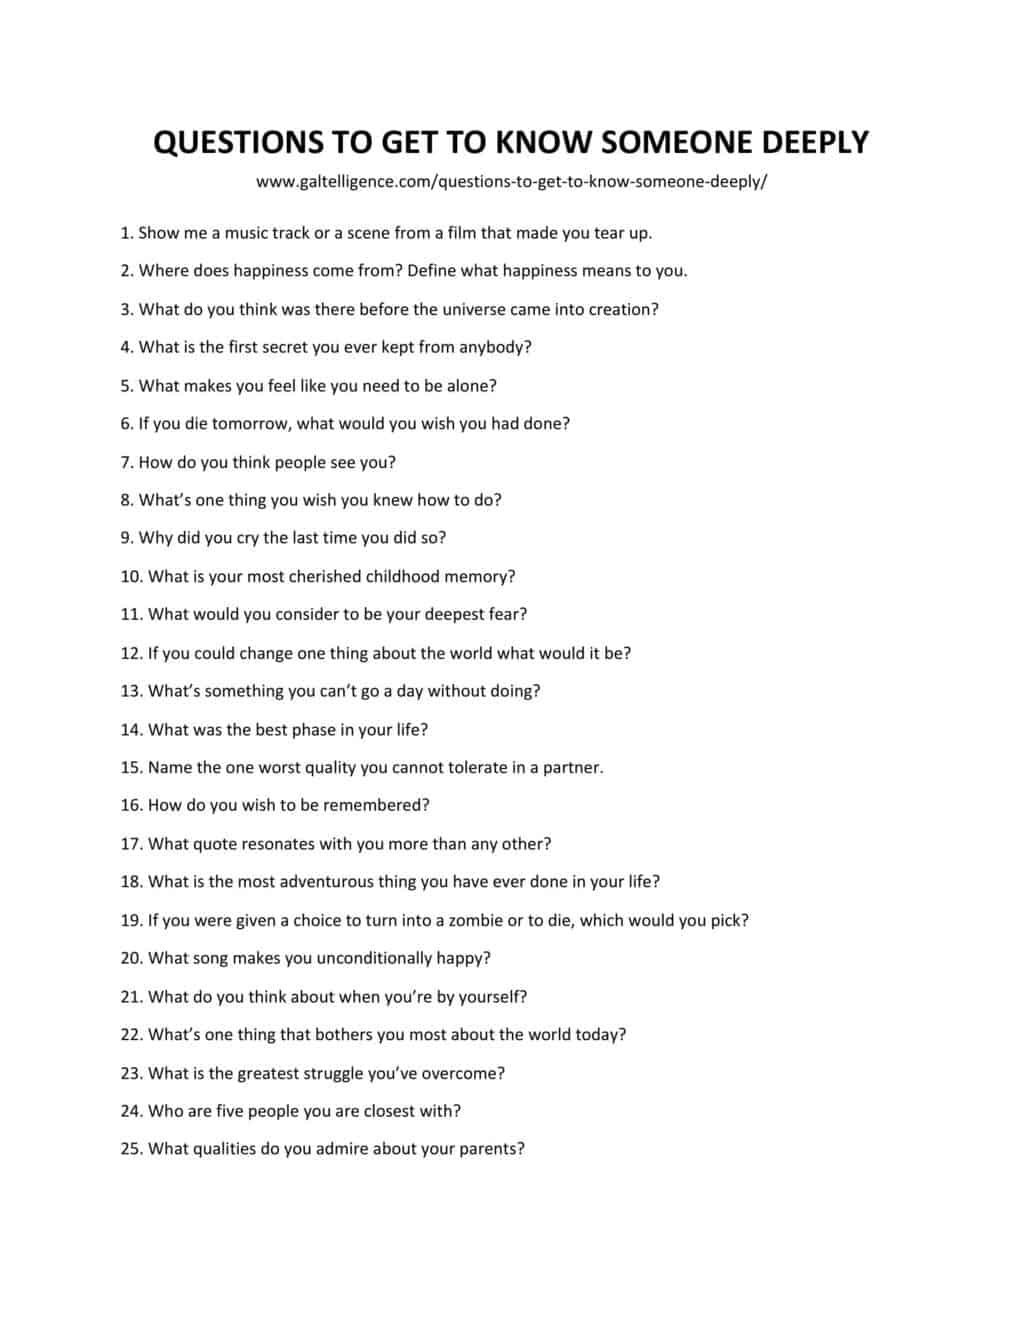 Downloadable And Printable List Of Questions To Get To Know Someone Deeply As JPG Or PDF 